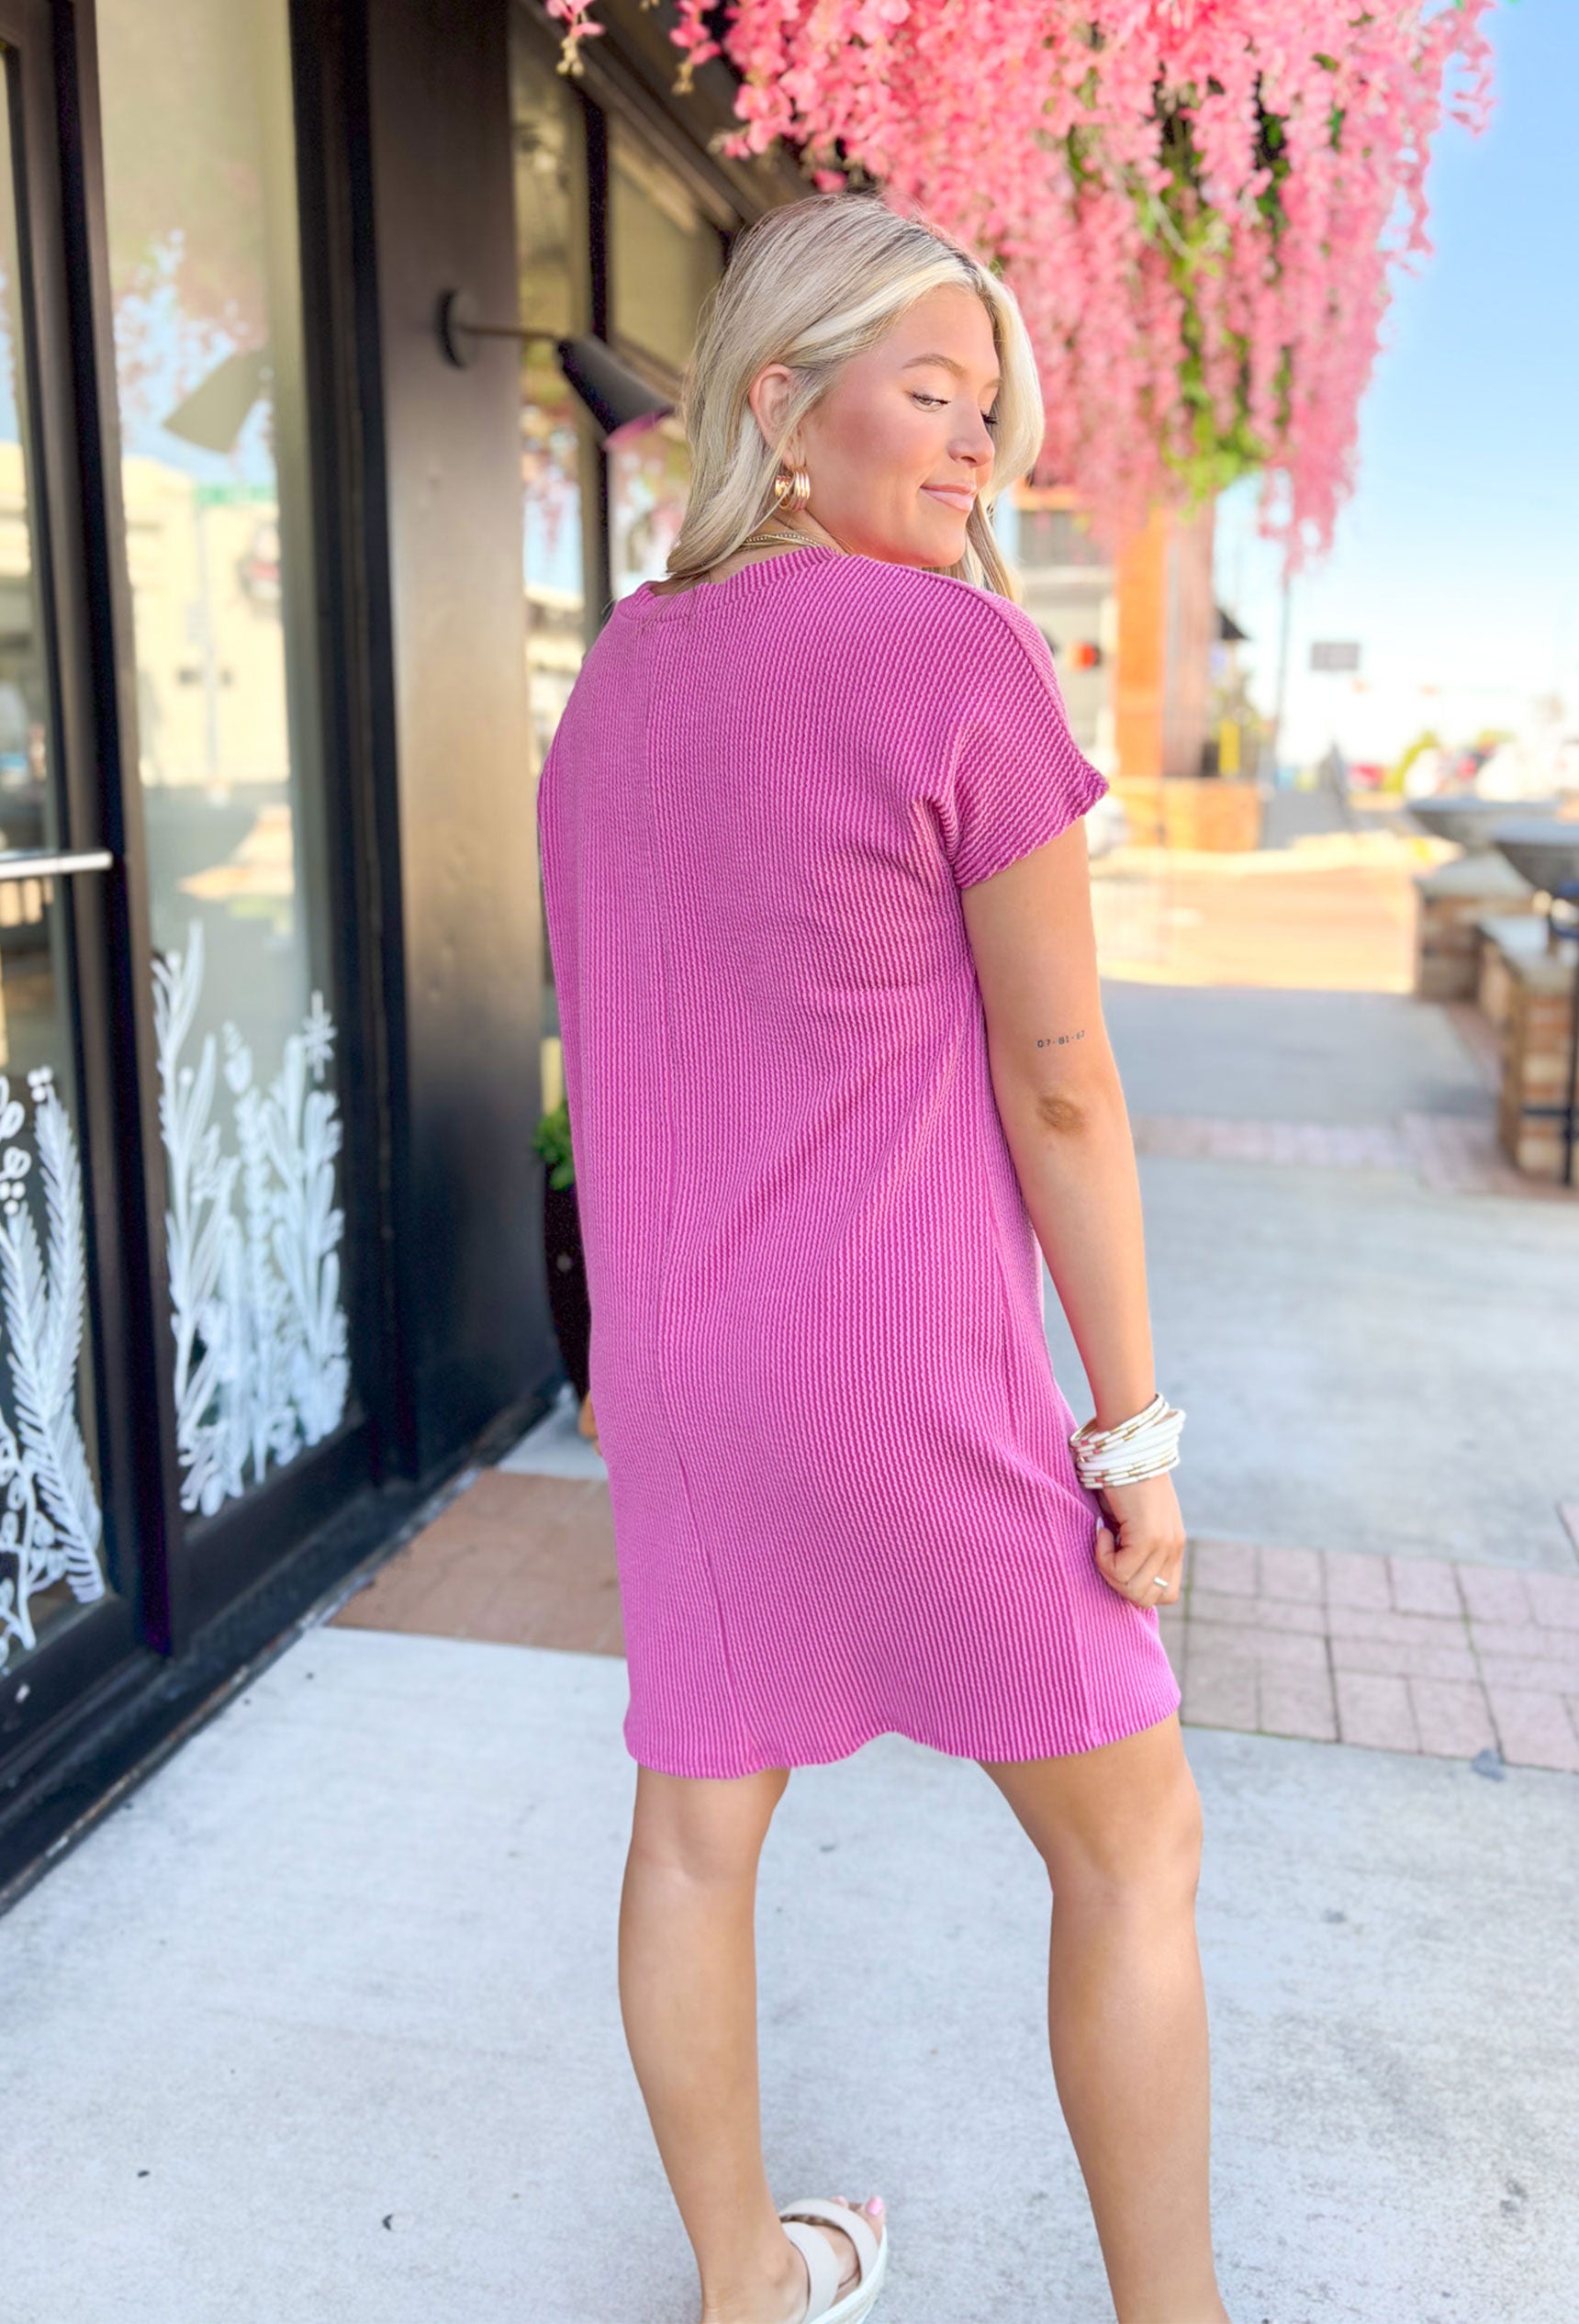 Feelings For You Dress in Pink, fuchsia pink ribbed short sleeve dress with front pocket